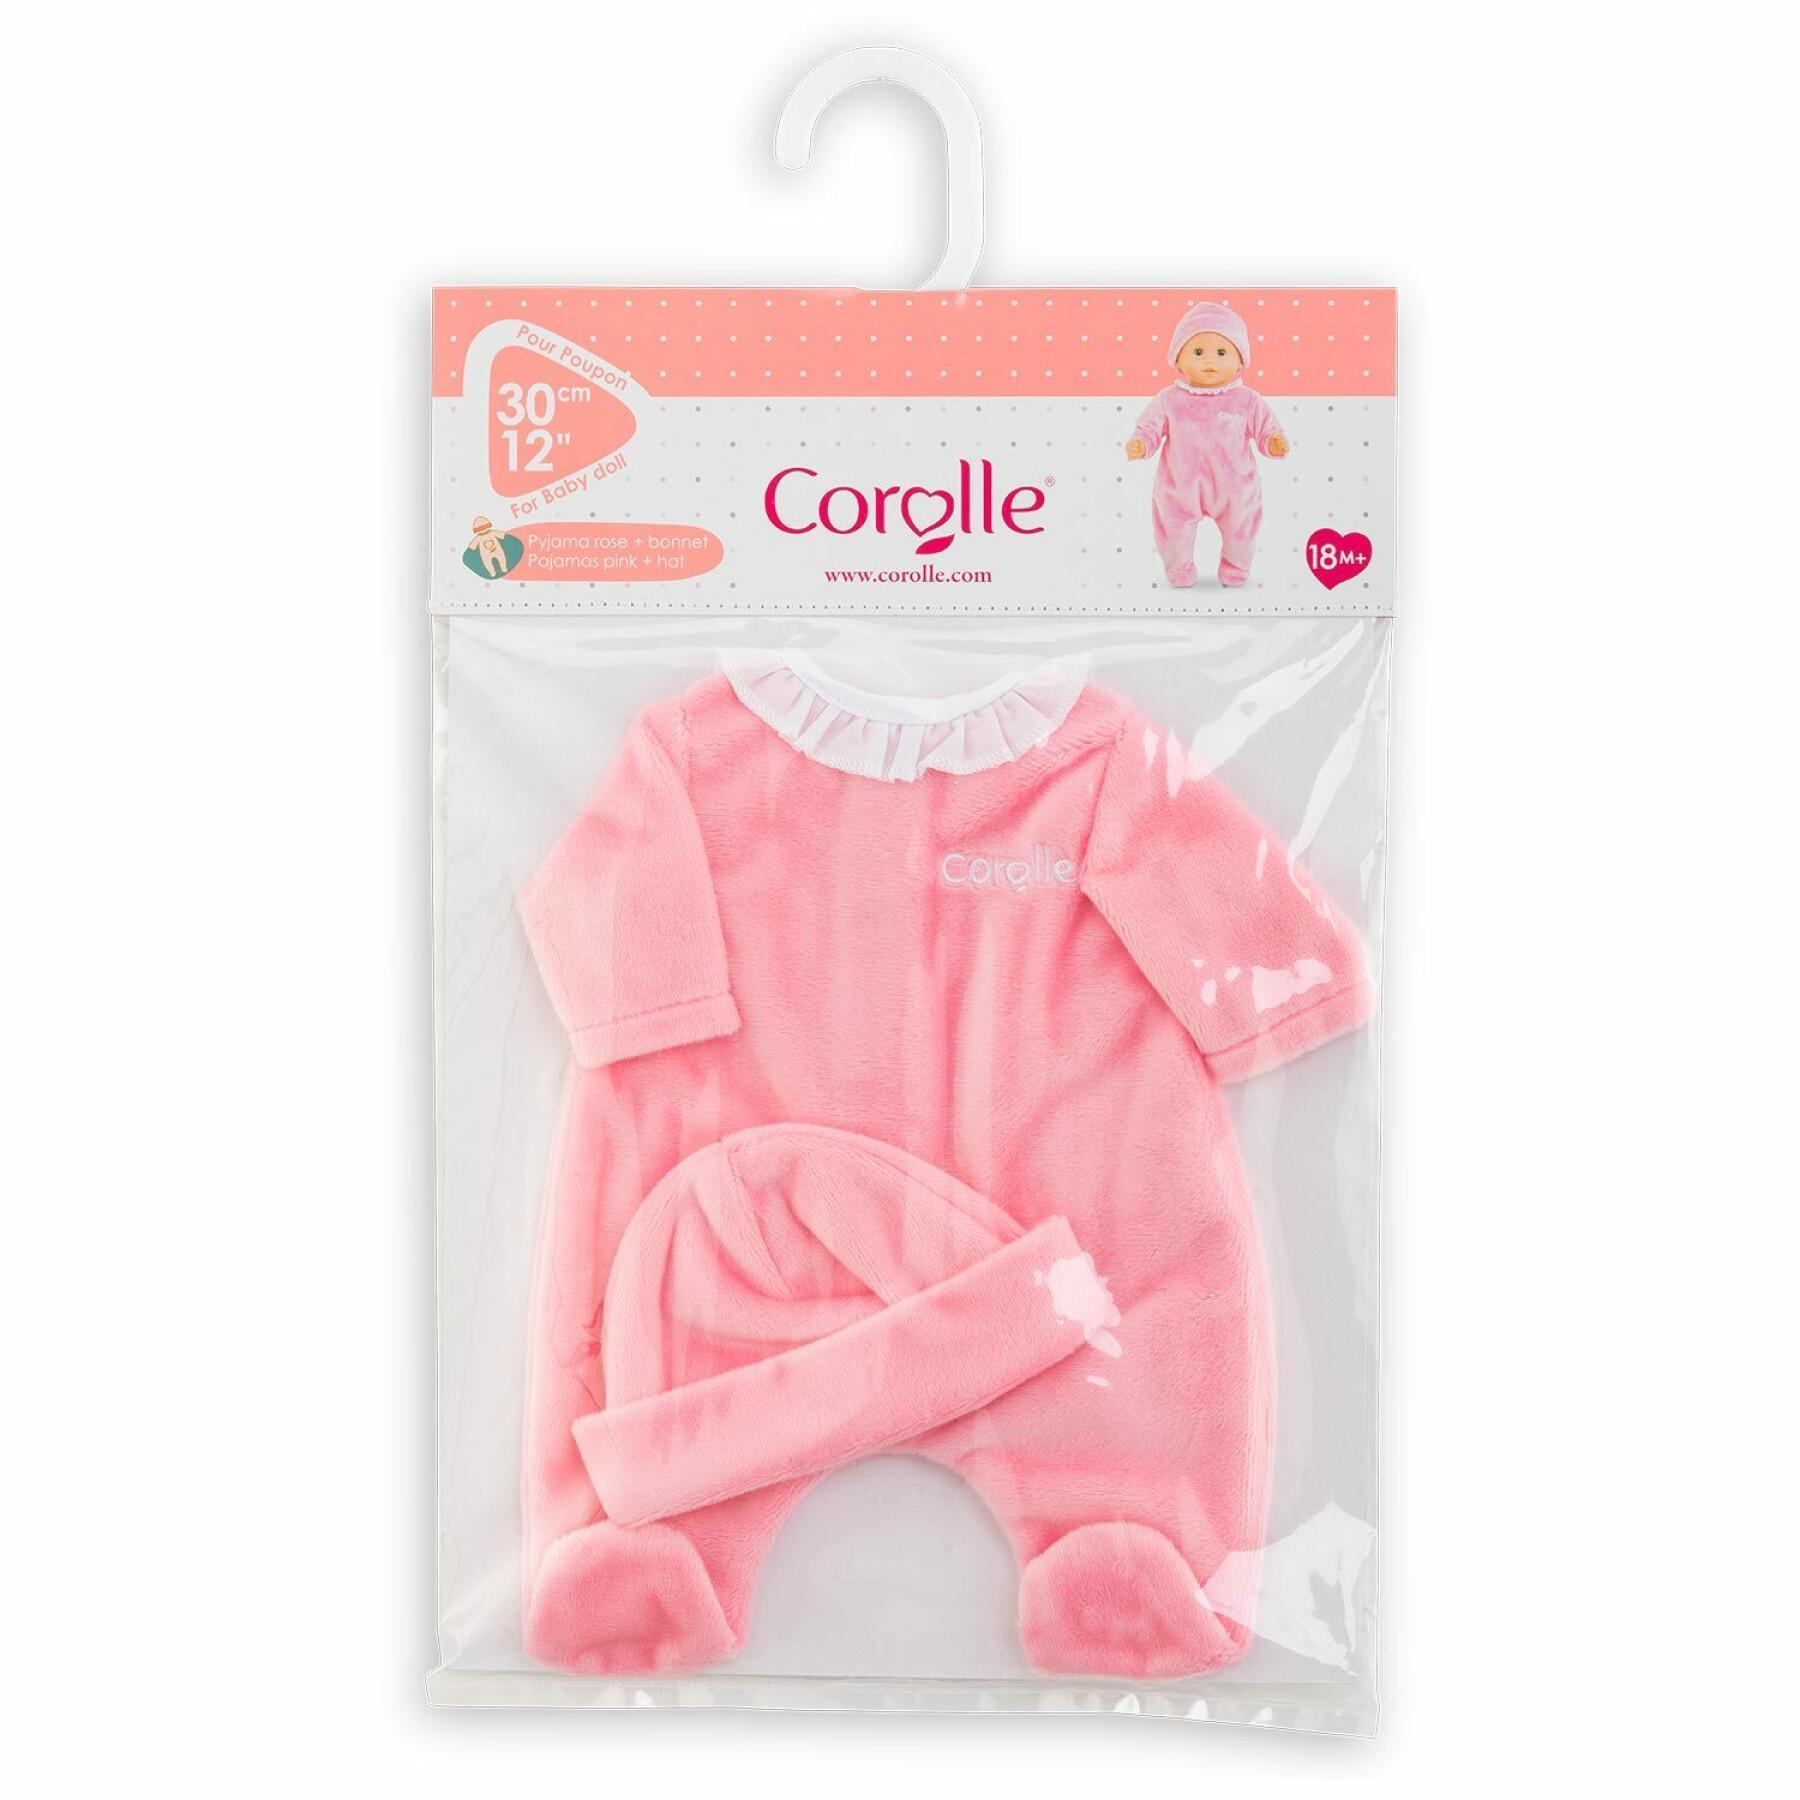 Pajamas and bonnet for baby Corolle